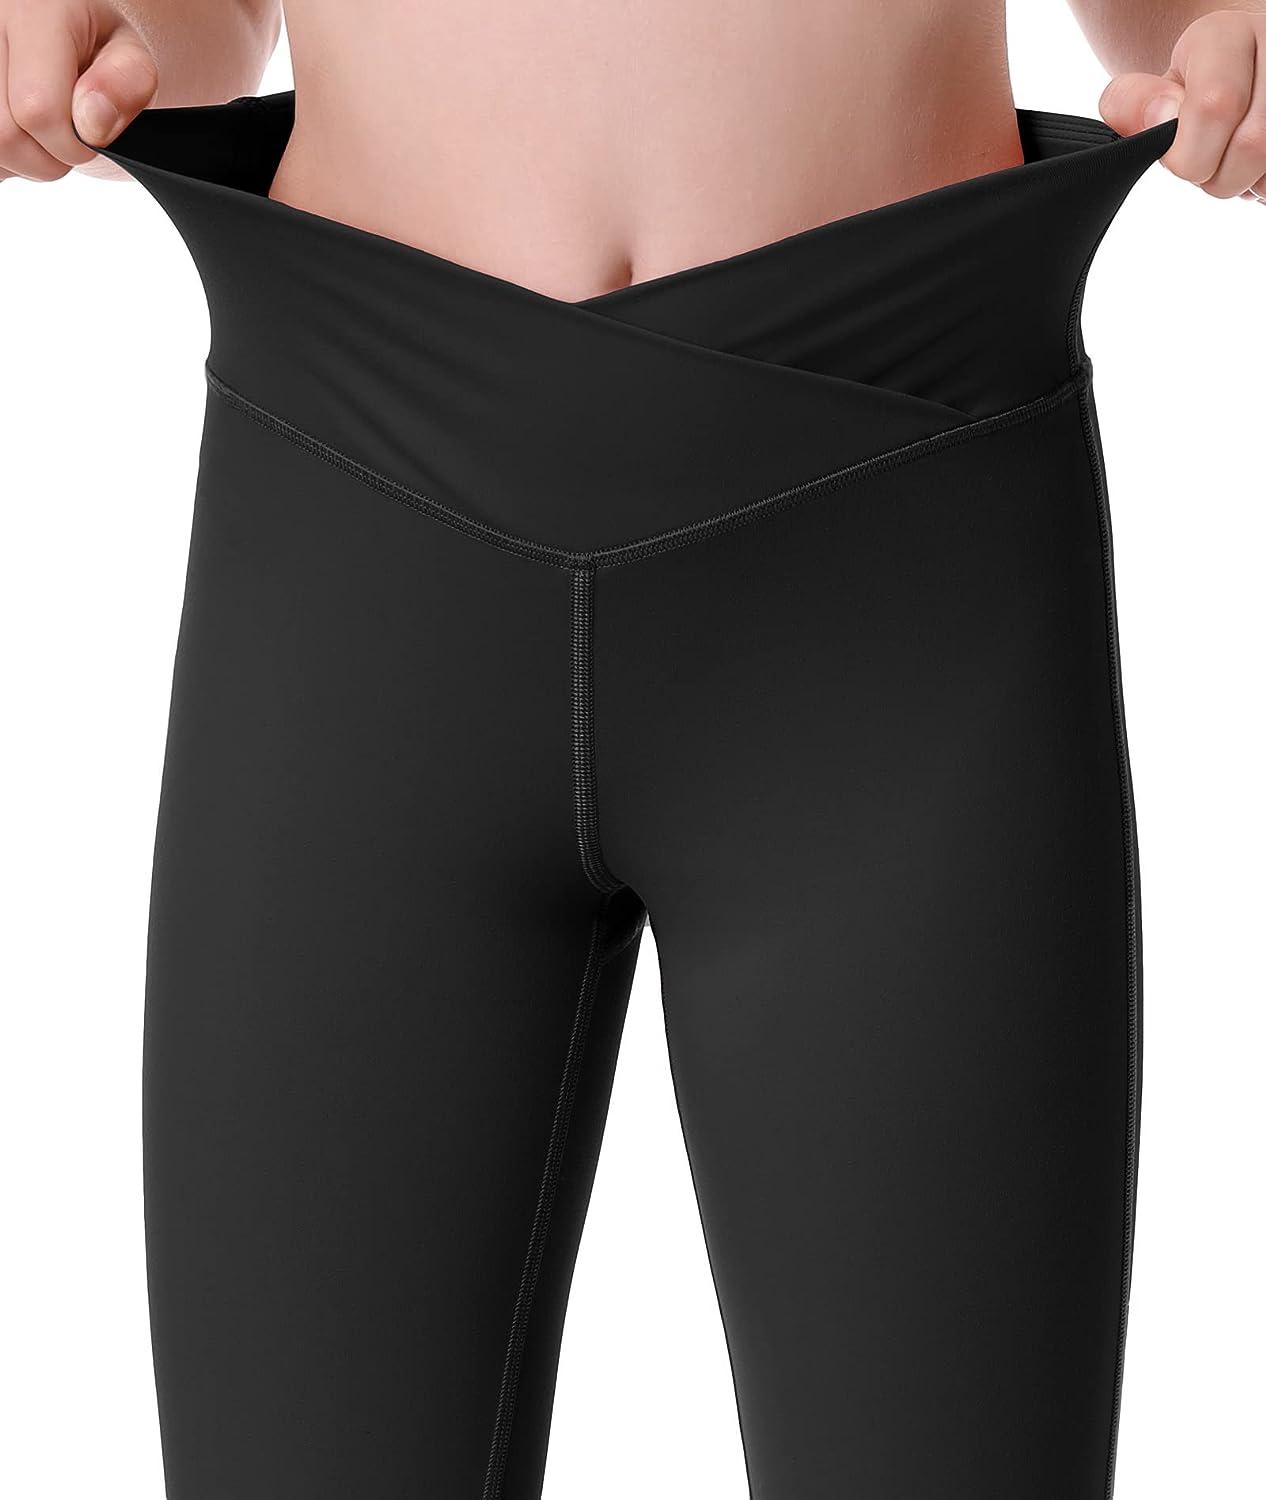 Women's Flare Yoga Pants -V Crossover High-Waisted and Wide Leg Workout Gym  Leggings Petite/Regular